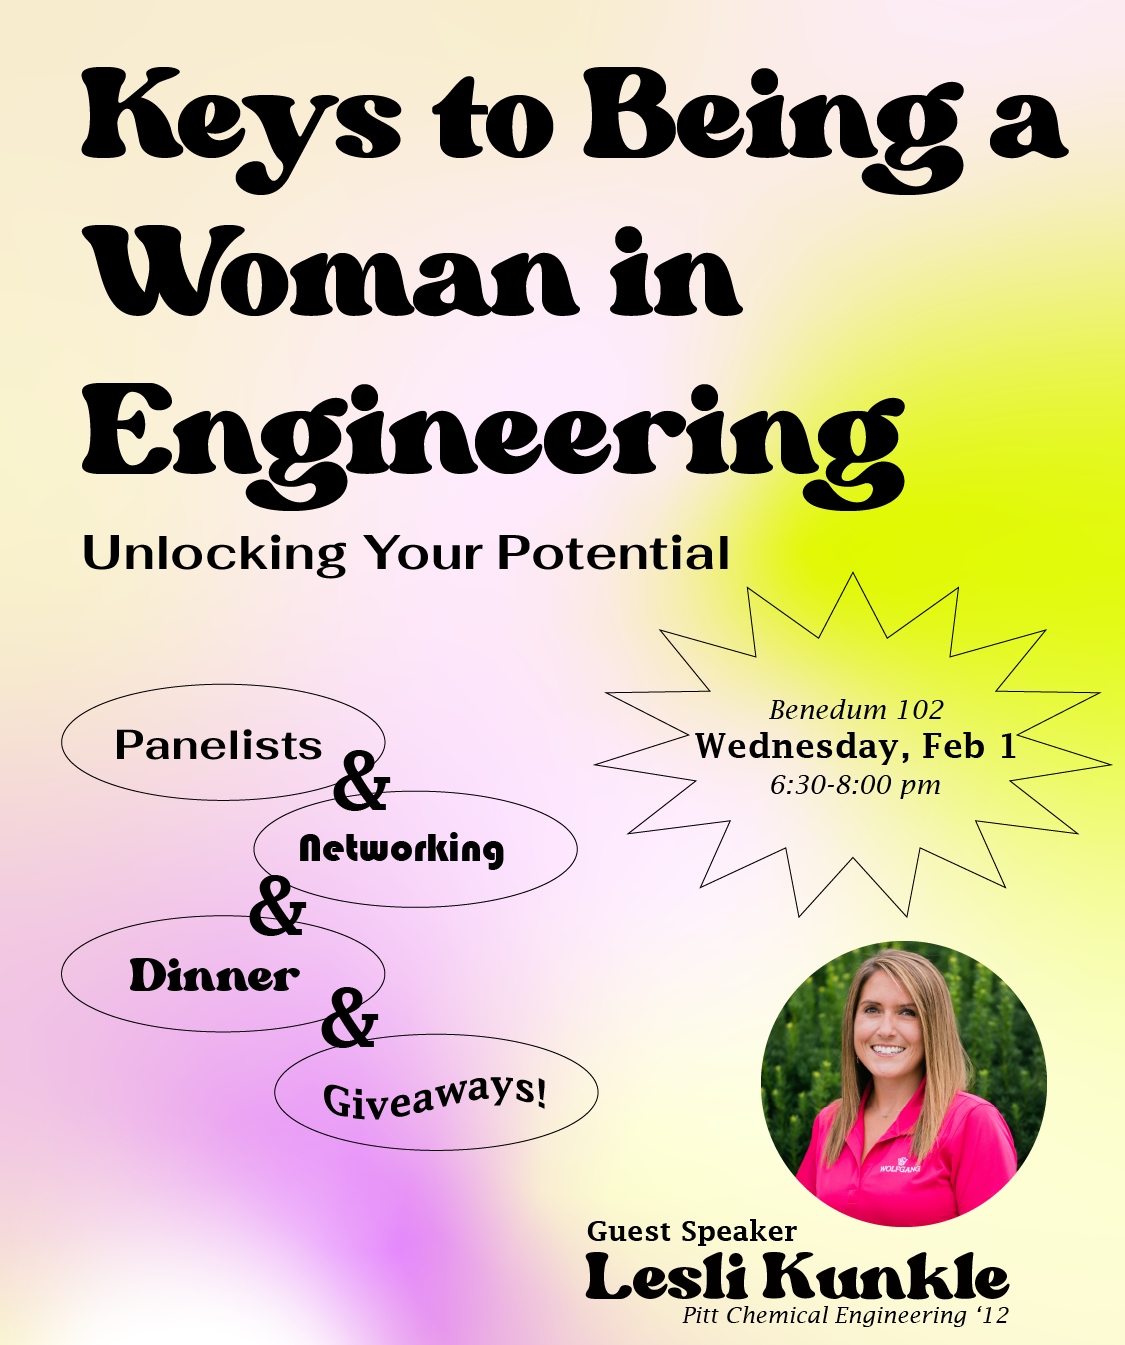 Keys to being a woman in engineering - unlocking your potential event poster for 2/1/23 at 6:30pm